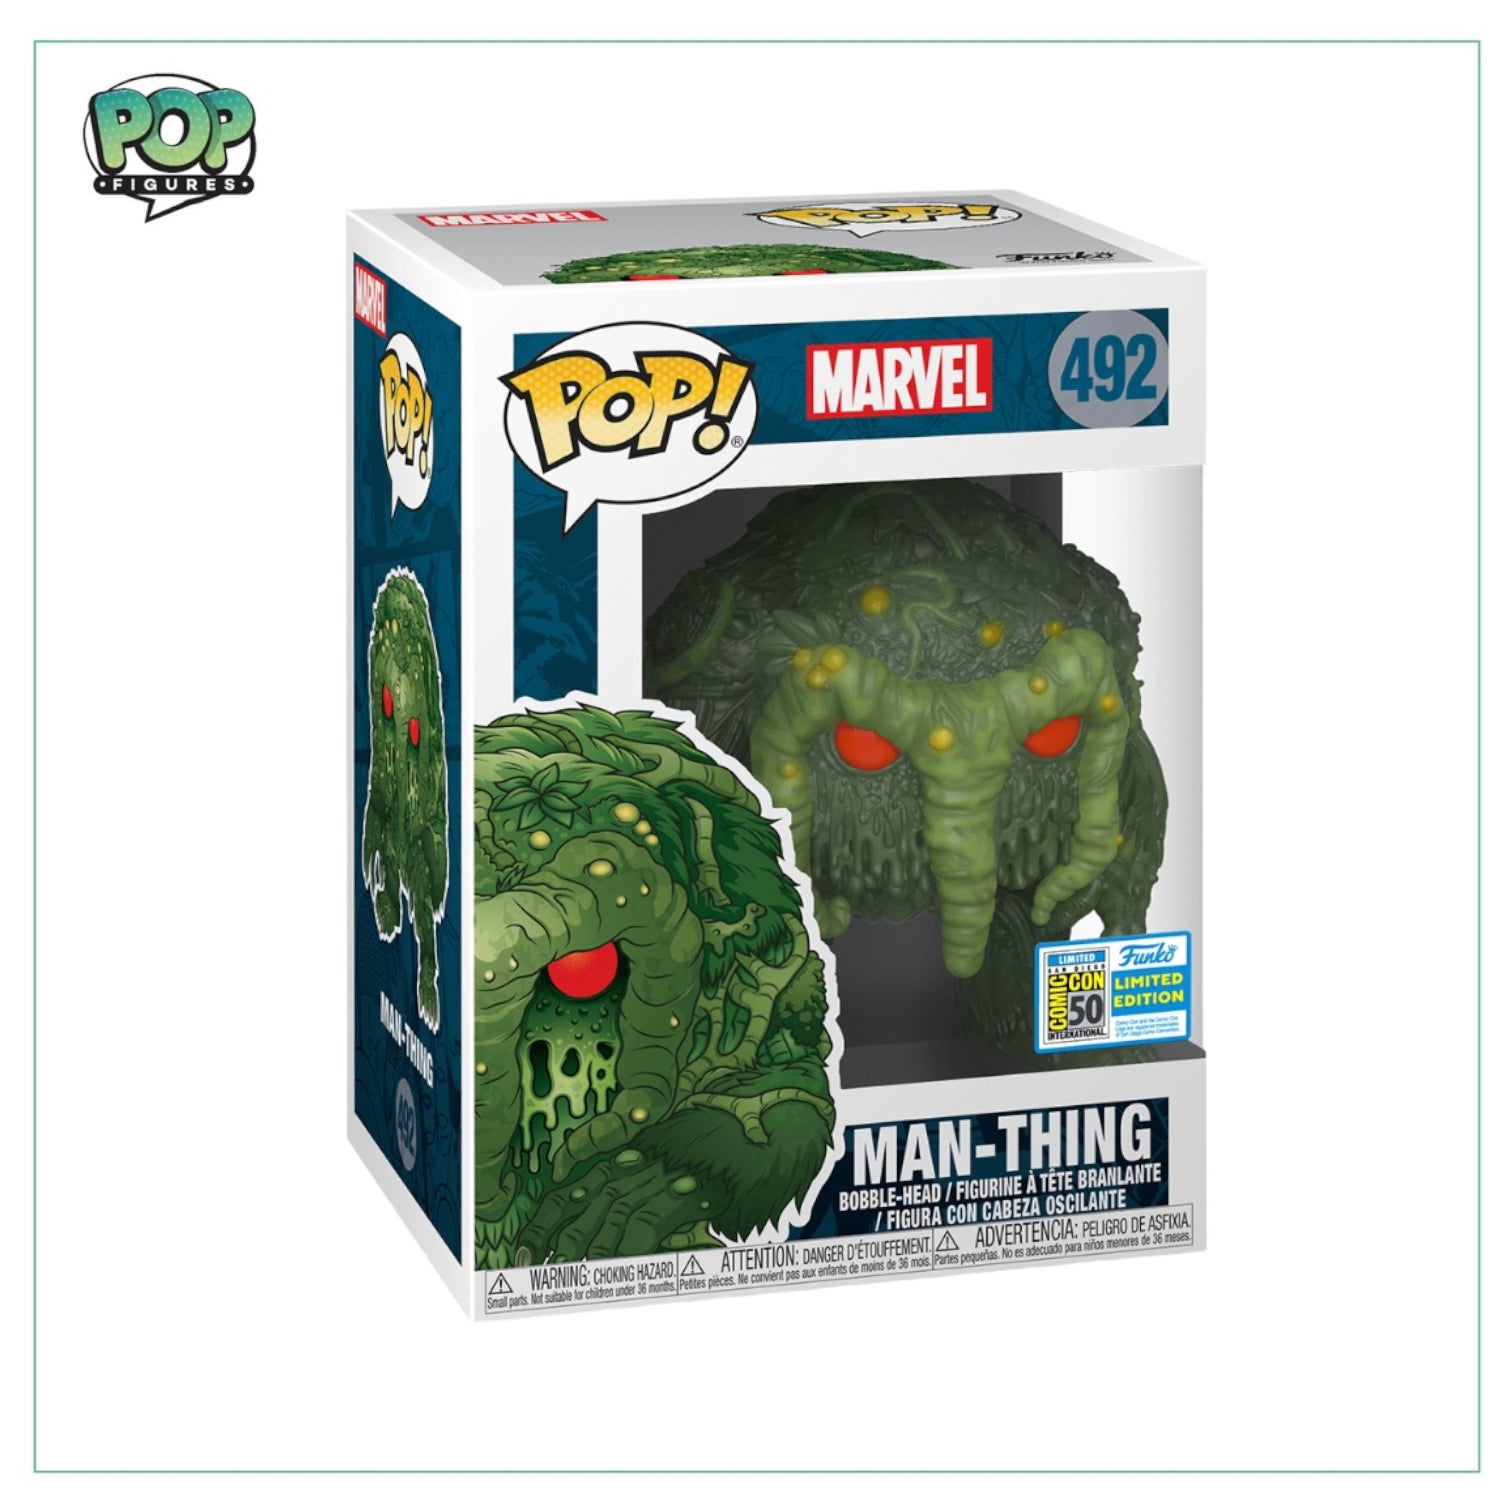 Man-Thing #492 Funko Pop! Marvel, 2019 SDCC Limited Edition Exclusive